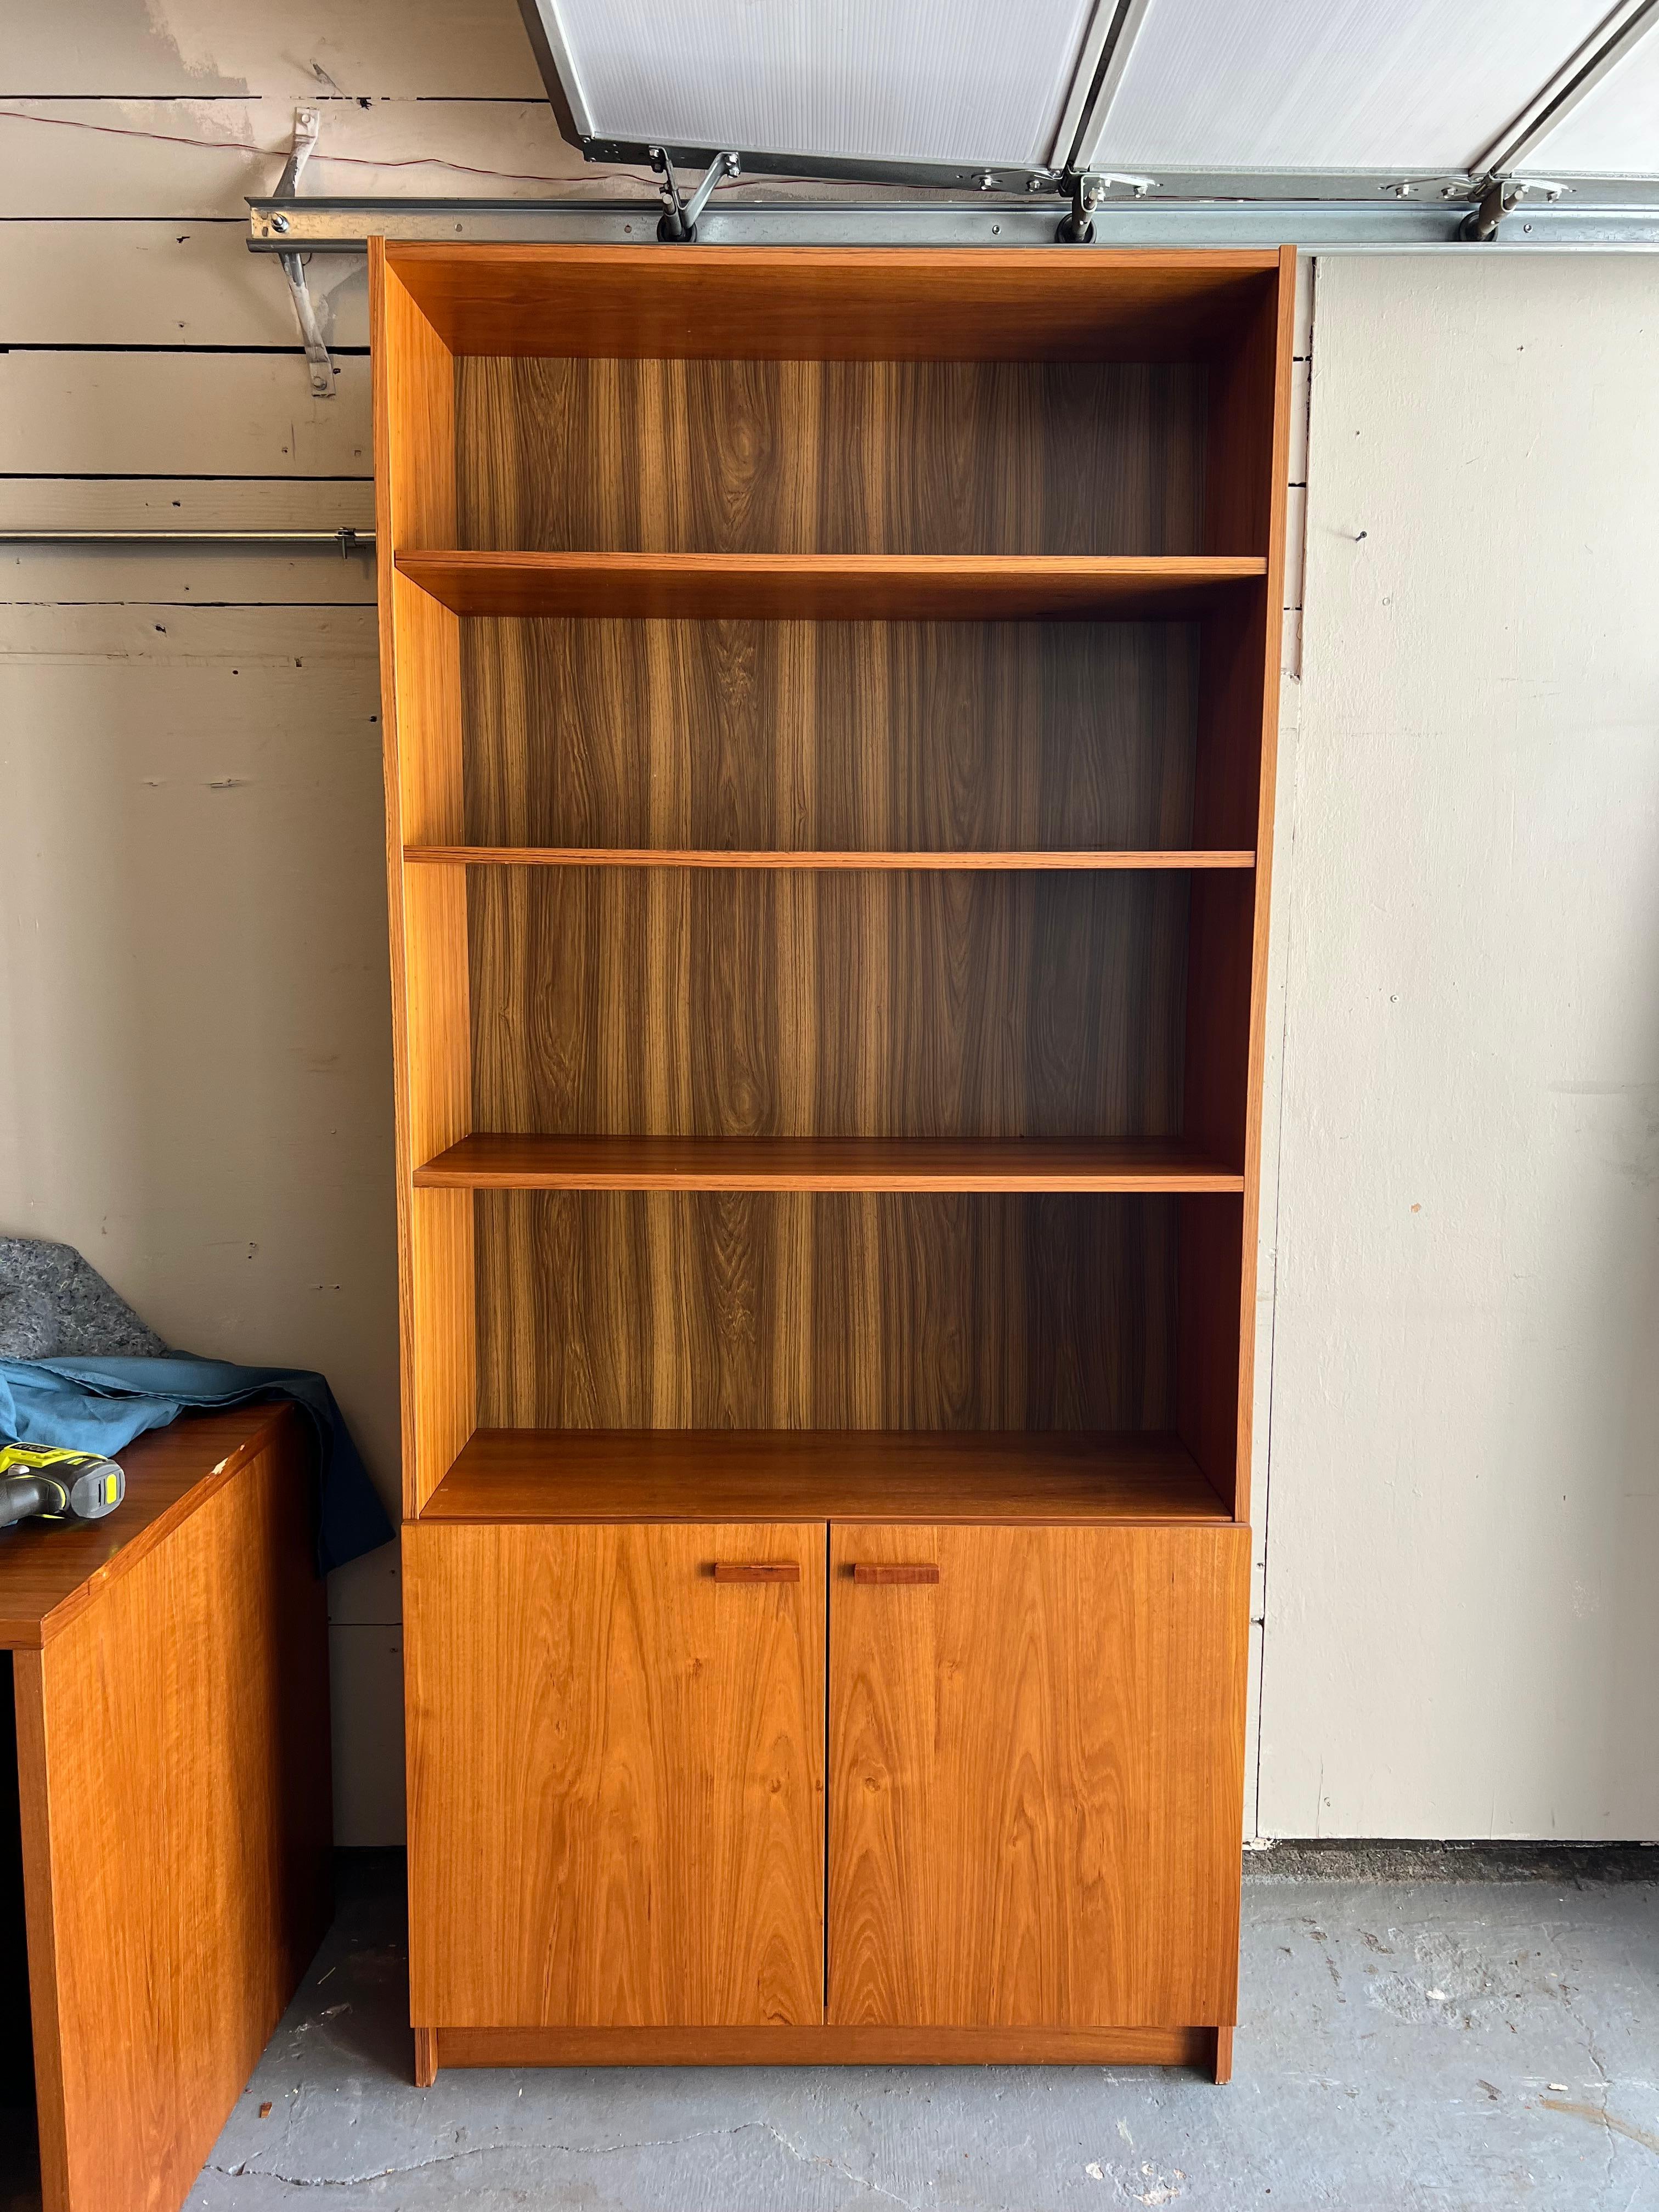 The best clean cut storage solution. Rare depth compared to similar units. Makes this piece all the more versatile. Two adjustable shelves, and cabinet doors can be adjusted as well. ie the enclosed portion of the unit could be in the center, or at